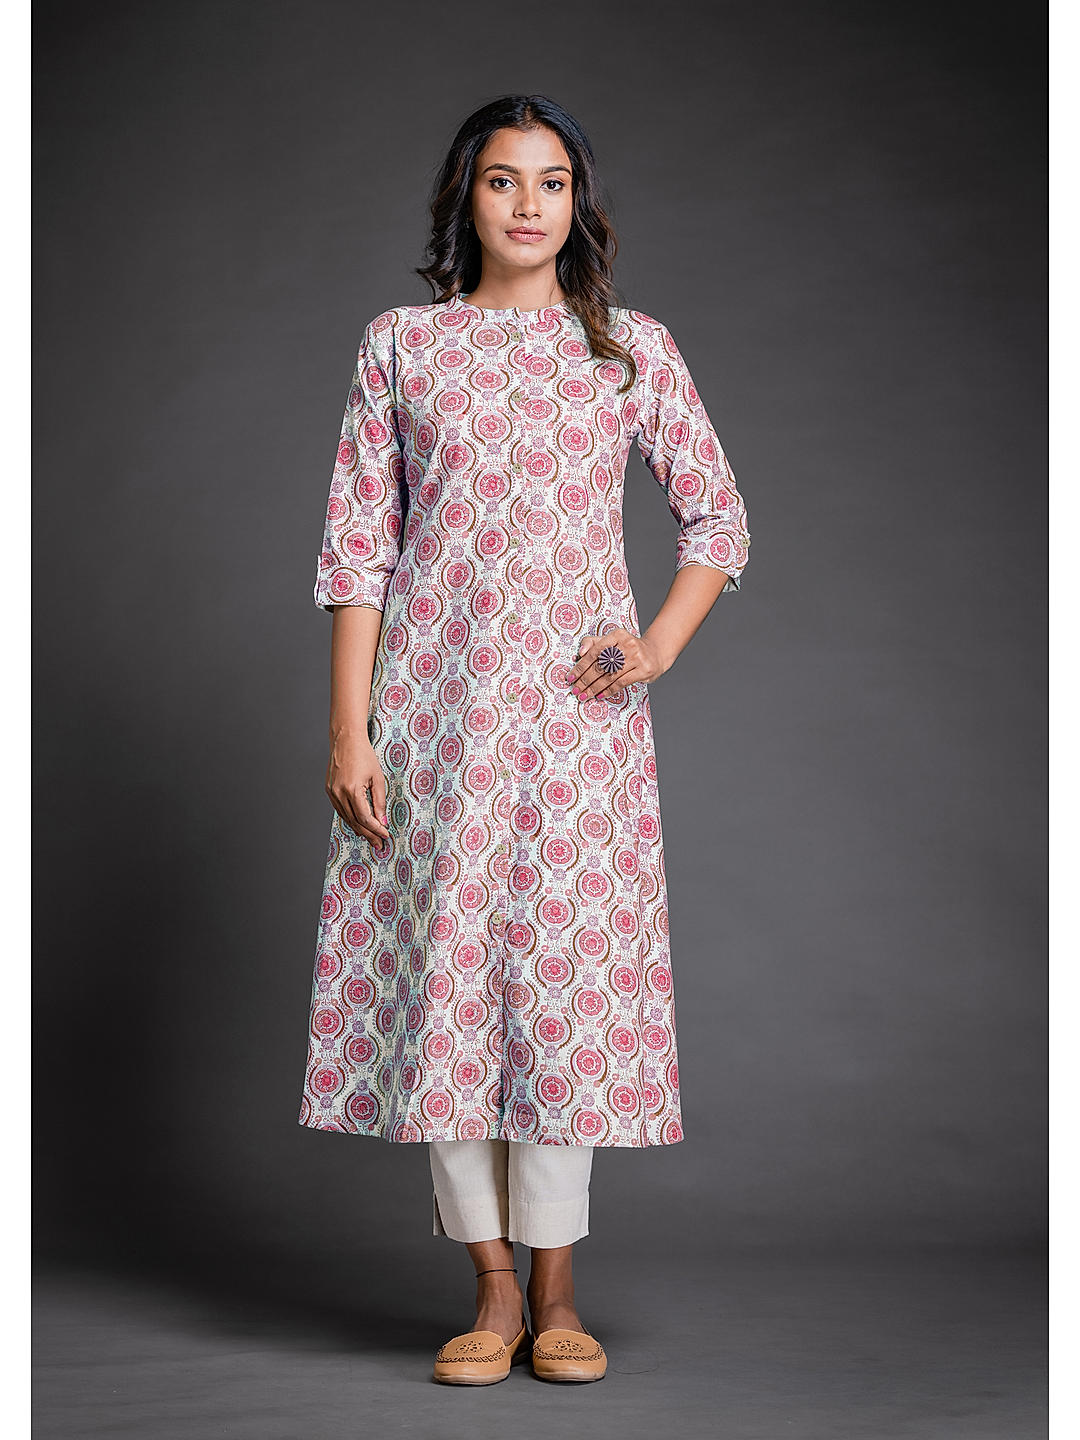 Vismay Brand Kurtis..Ready To Ship.. Cathy's Collections..For Bookings  9497352940 - YouTube